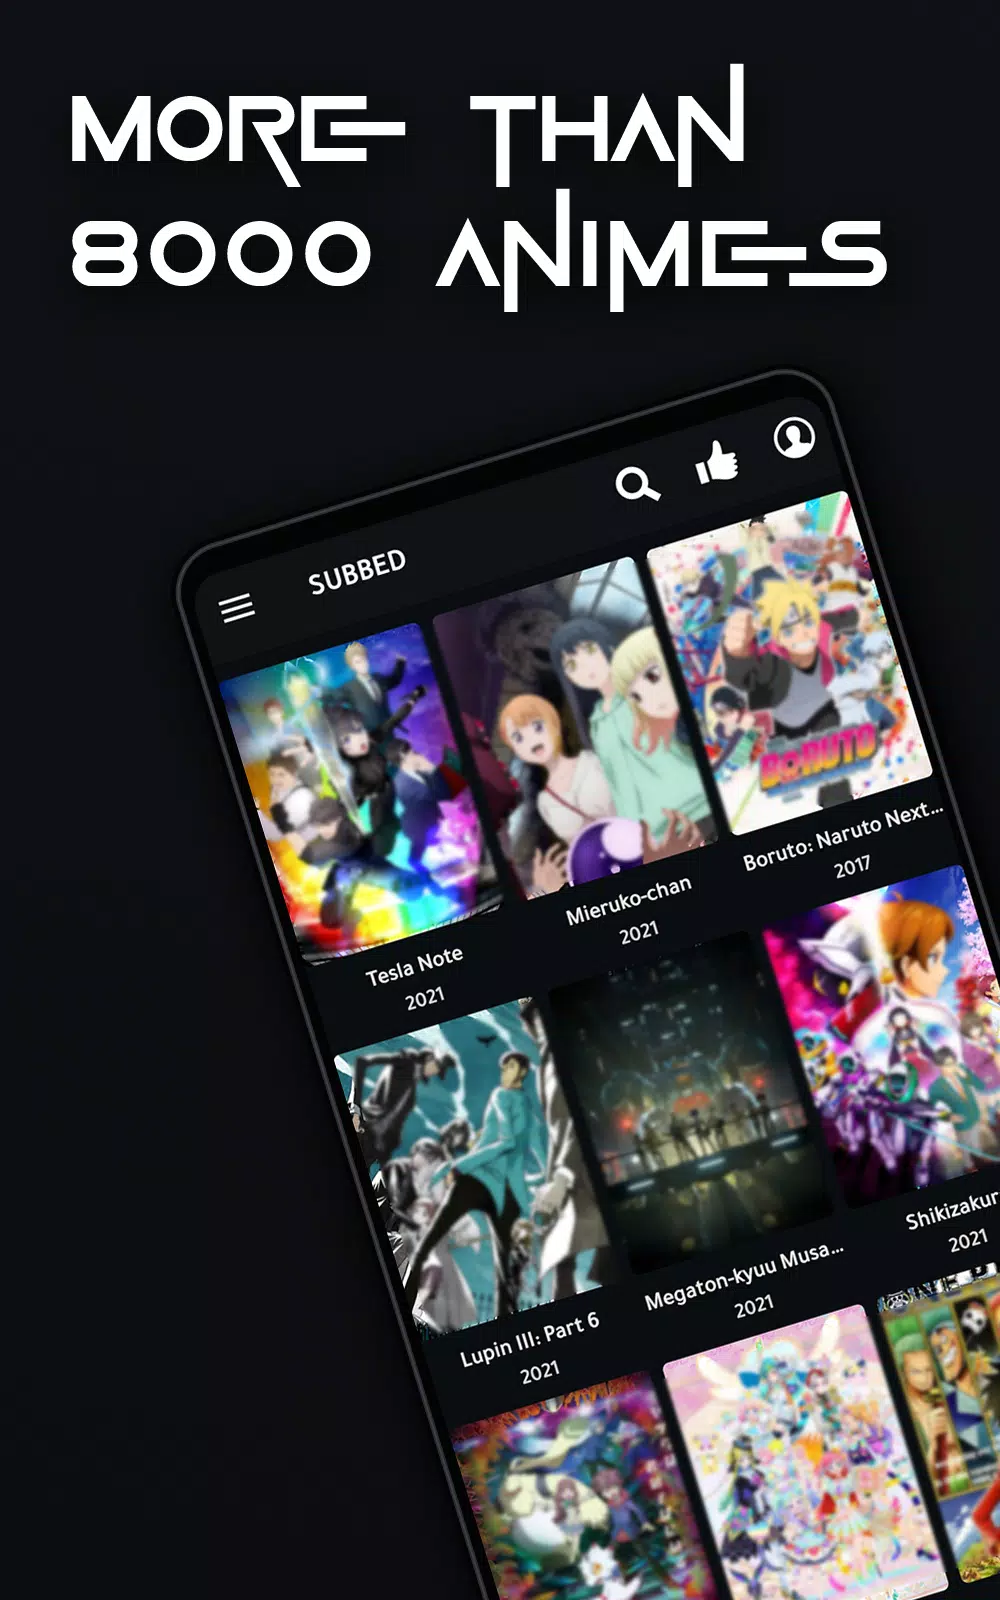 Watch Anime APK for Android Download